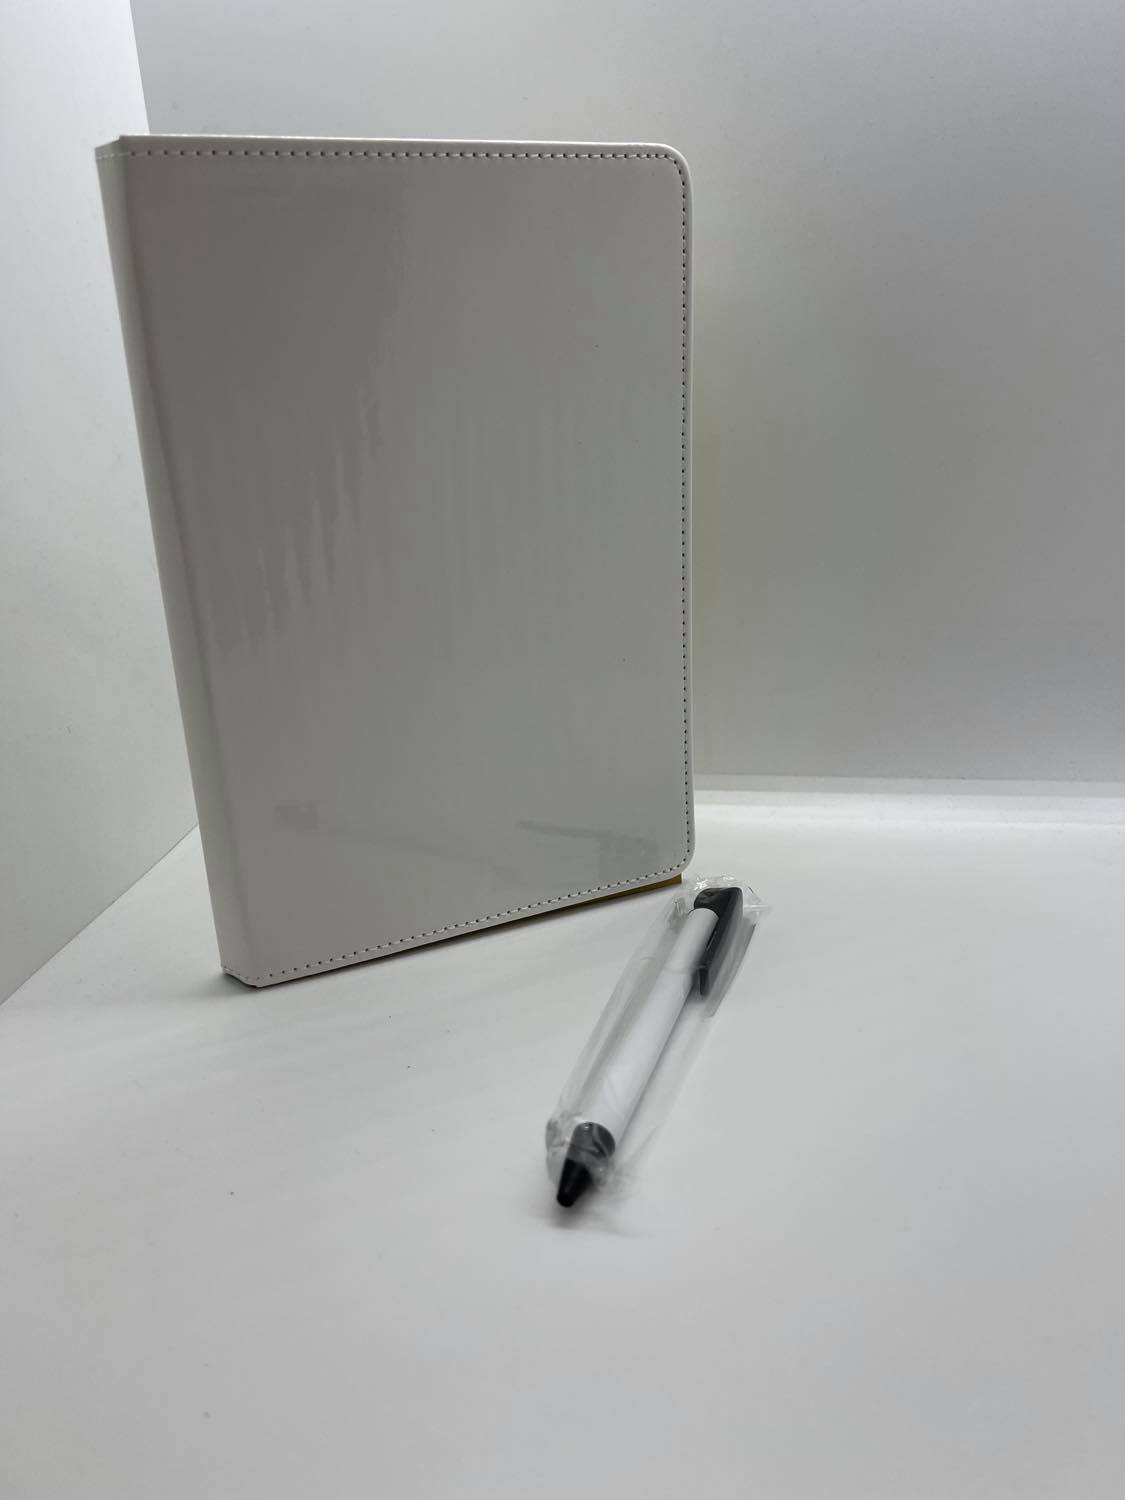 Blank Journal & Pen Set – Creative Touch Gifts Inc.